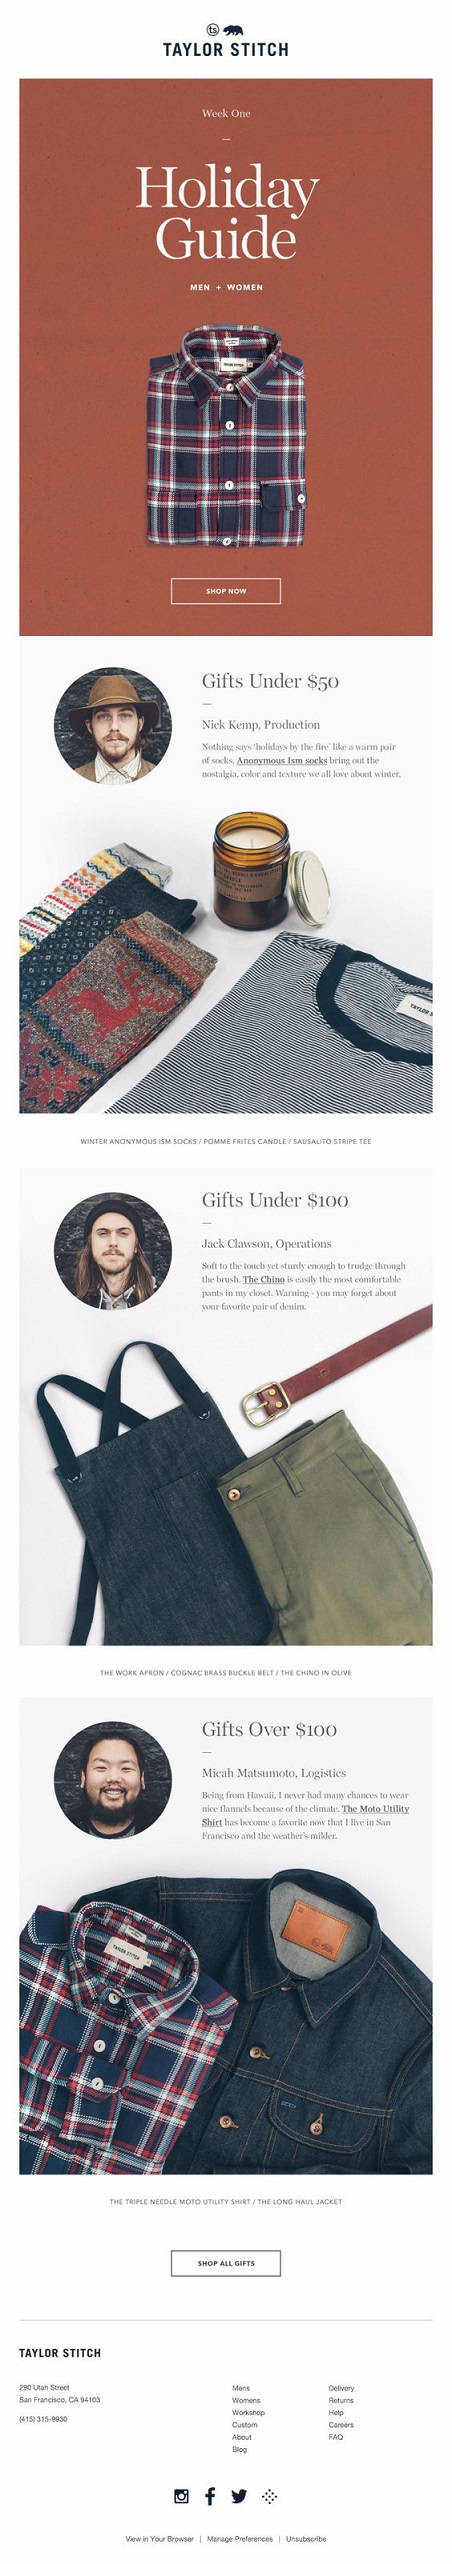 Gift Guide Email Marketing Example